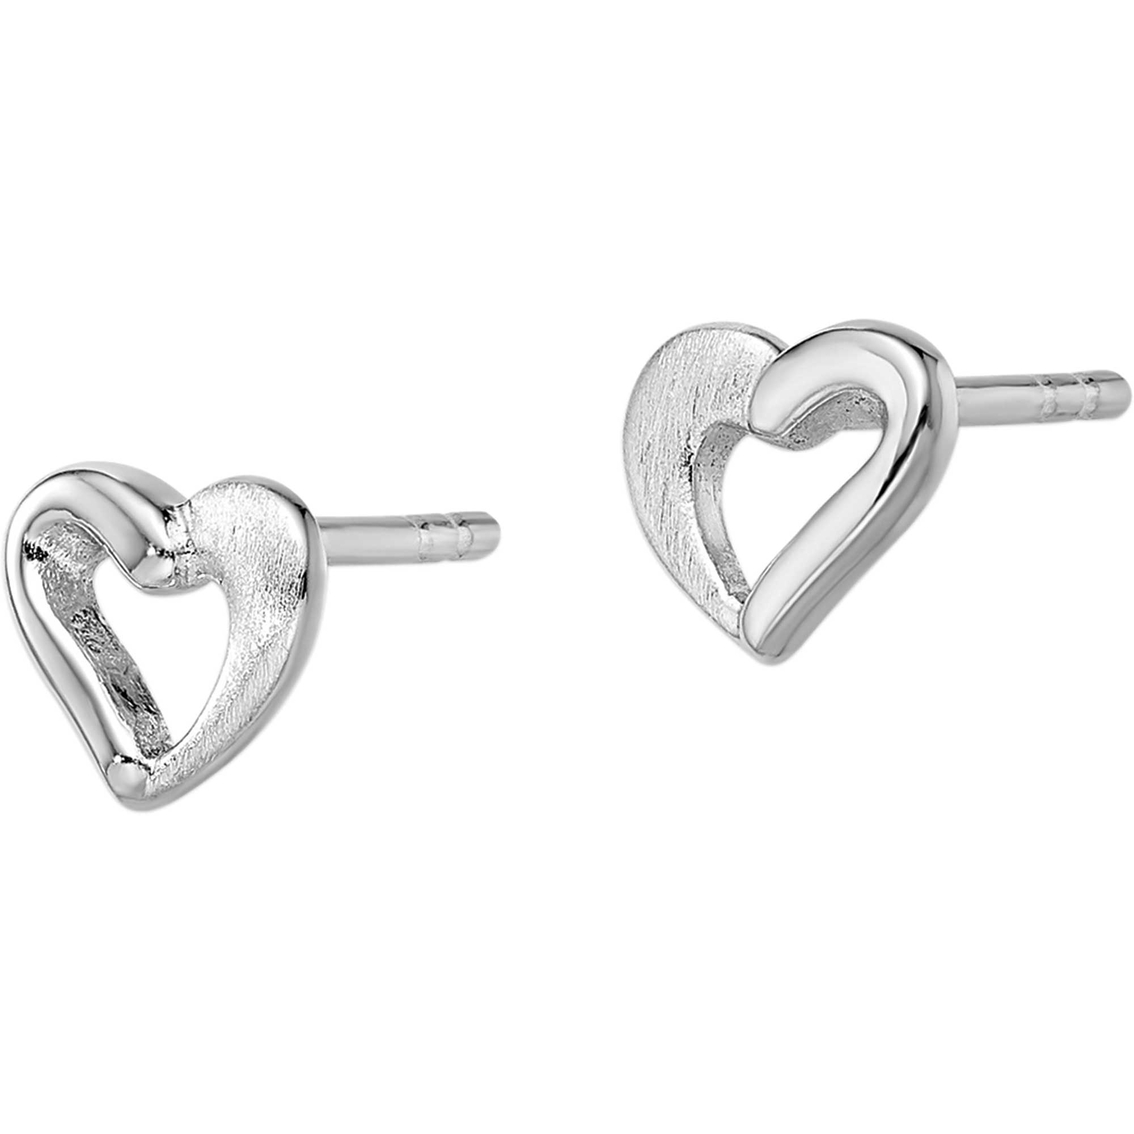 Rhodium Over Sterling Silver Open Heart Post Earrings - Image 2 of 2